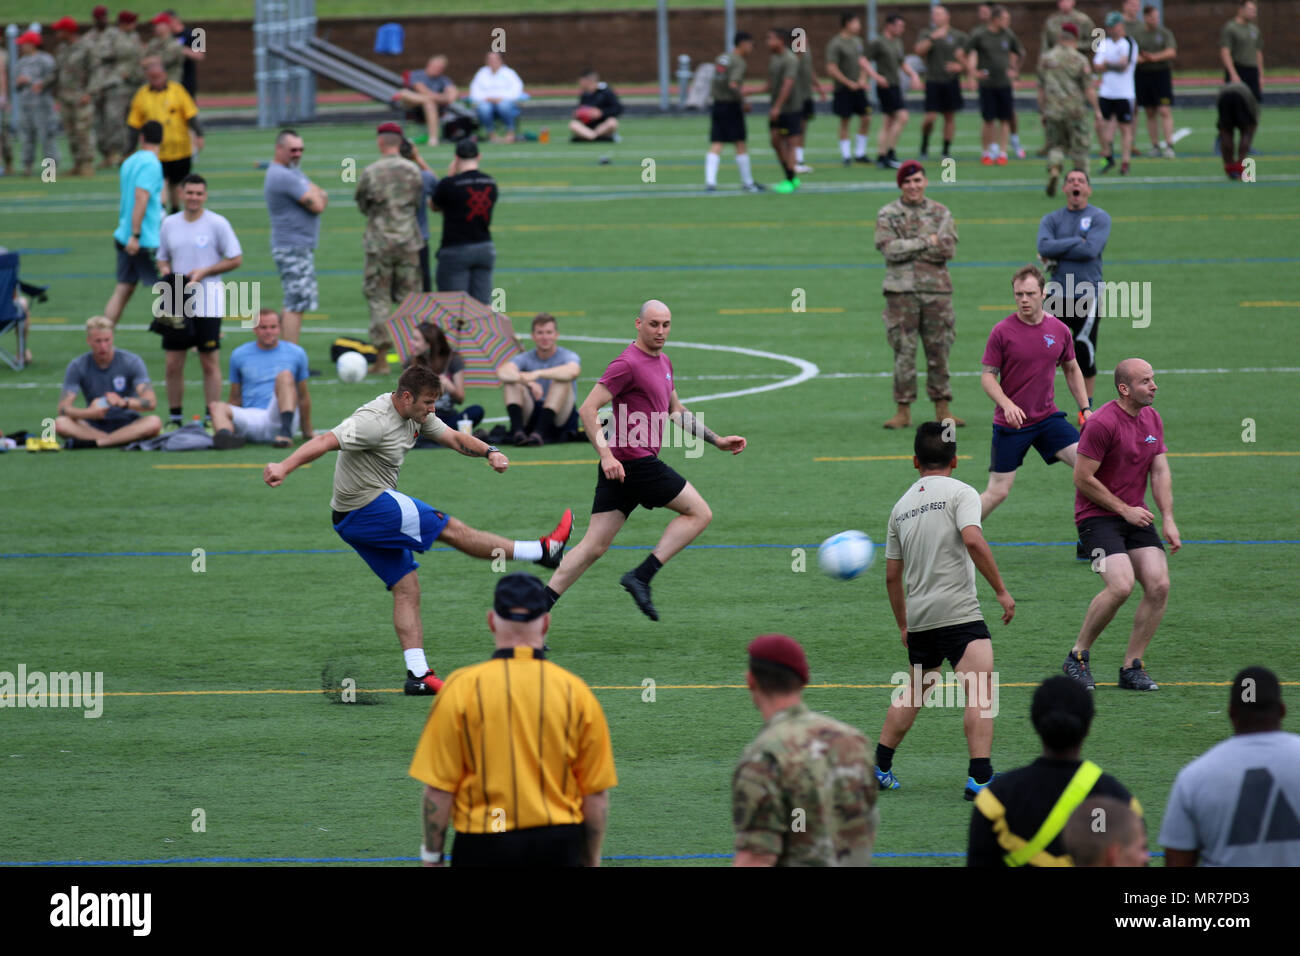 A British Paratrooper assigned to the 3rd (United Kingdom) Division’s Signal Regiment takes a shot at goal during an All American Week 100 soccer match at Towle Stadium, Fort Bragg, N.C., May 23, 2017. During All American Week 100, Paratroopers from throughout the Division competed in softball, soccer, flag football, tug-of-war, combatives, boxing, a best squad competition, a combat fitness test and the Little Group of Paratroopers competition for bragging rights and a shot at “Best Battalion.” All American Week is an opportunity for Paratroopers, past and present, to come together and celebra Stock Photo